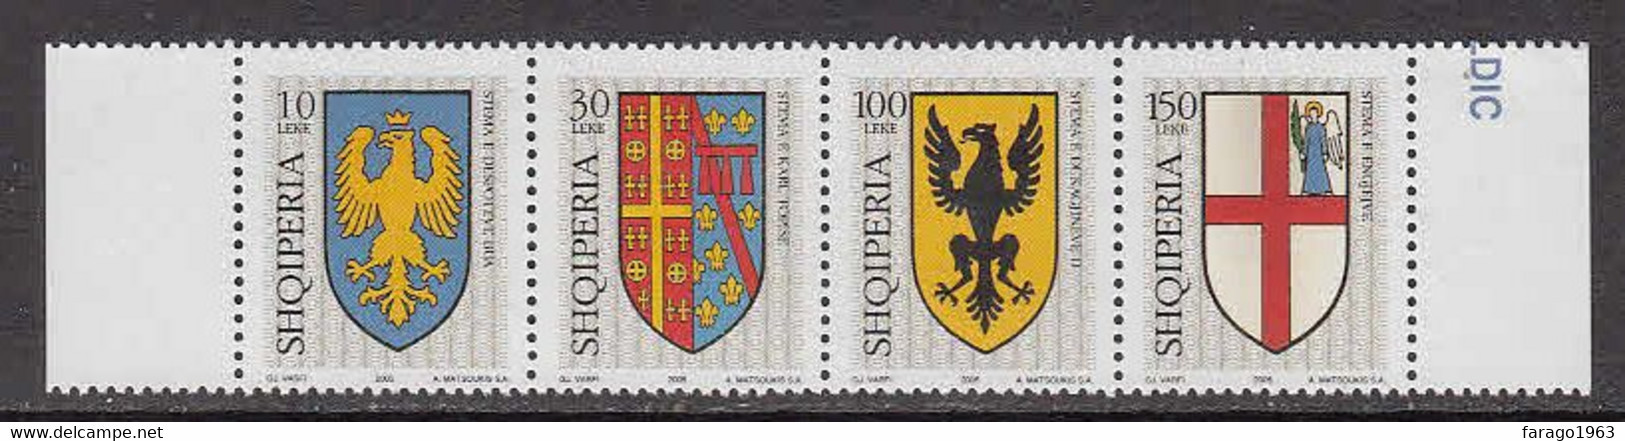 2005 Albania Coat Of Arms Complete Strip Of 4 MNH - Albania